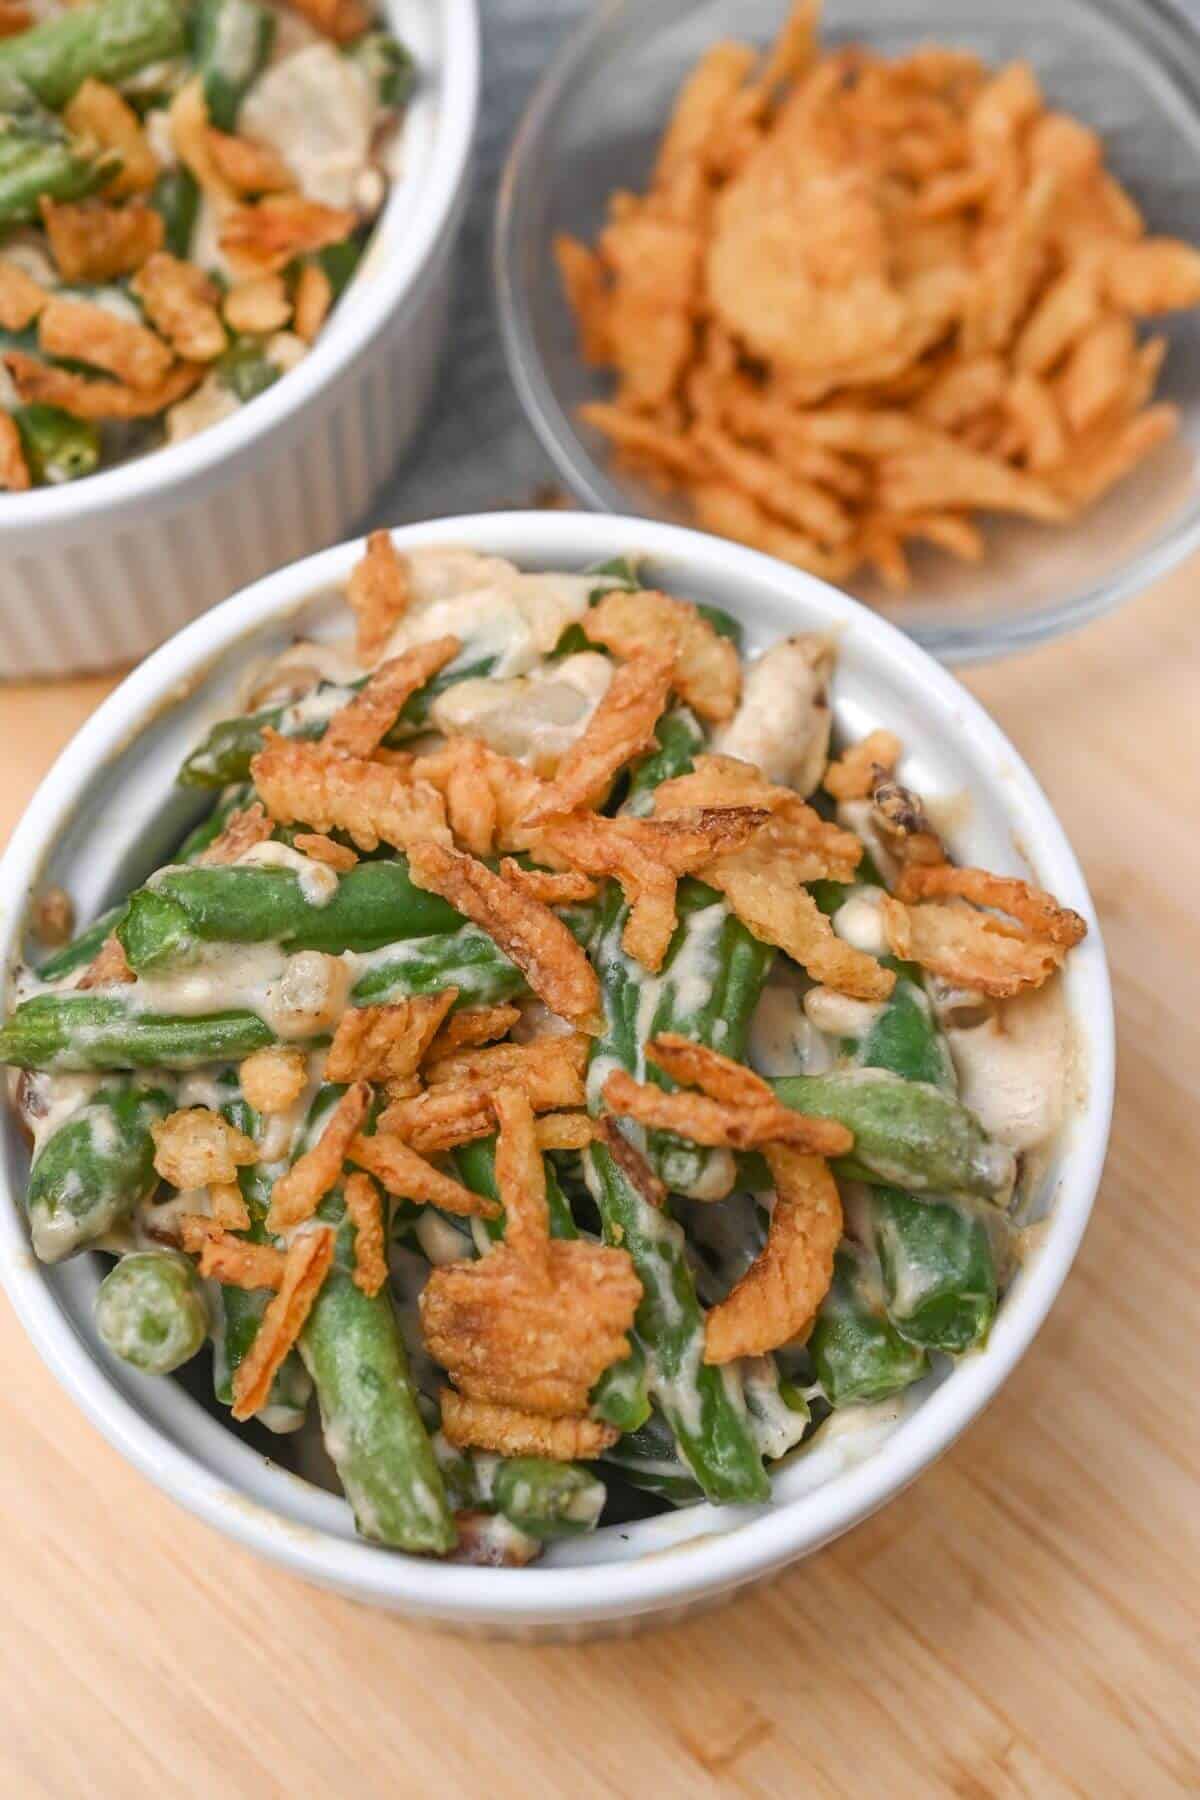 Two bowls of green bean casserole on a wooden table.